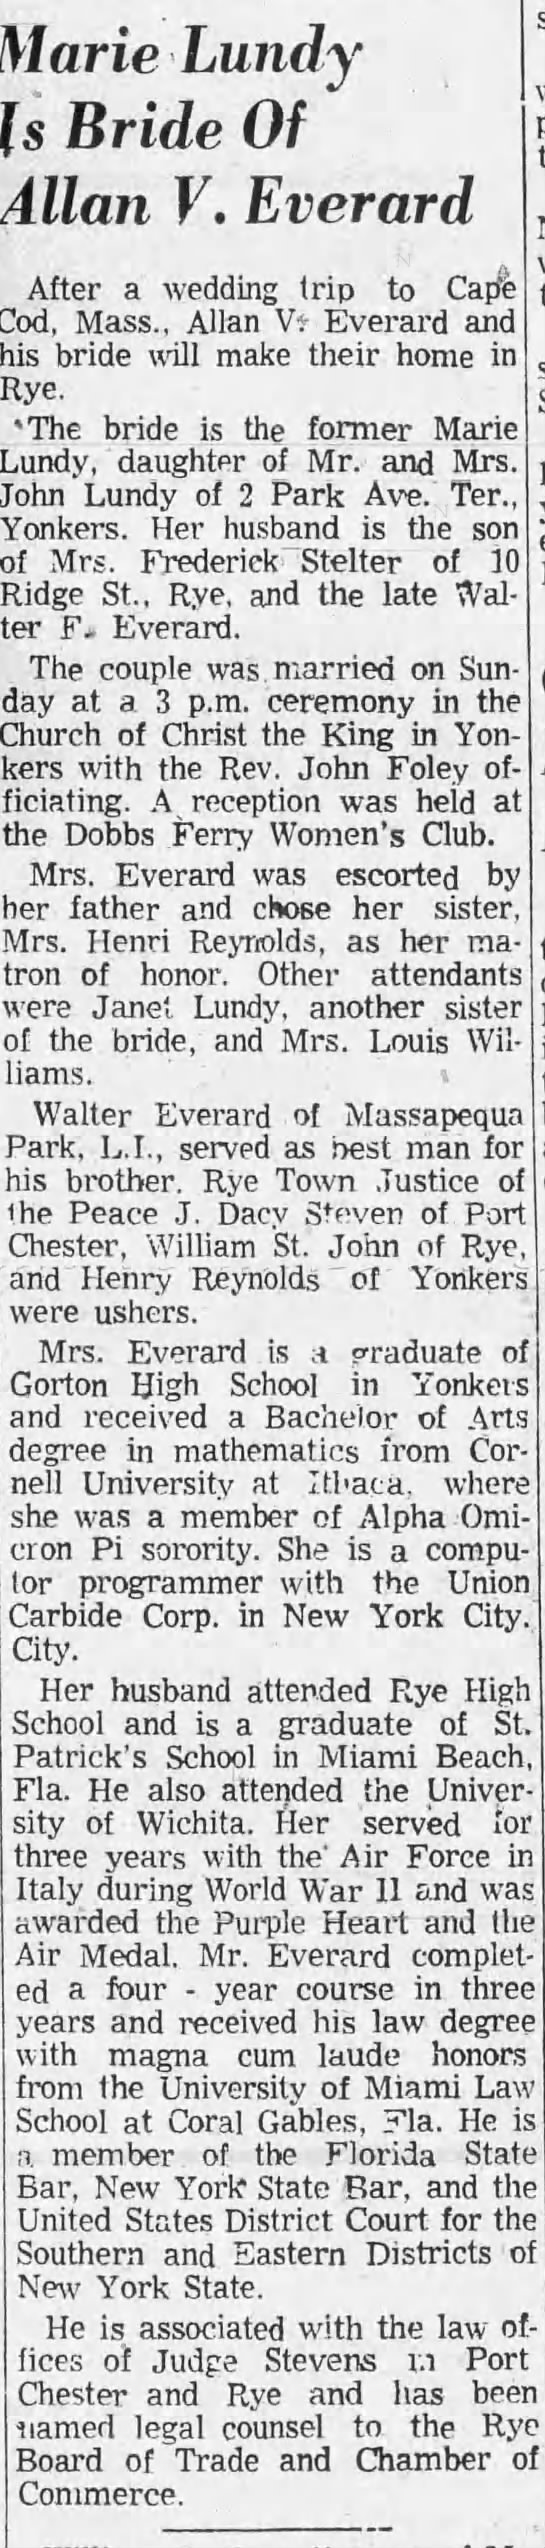 Marriage of Lundy / Everard